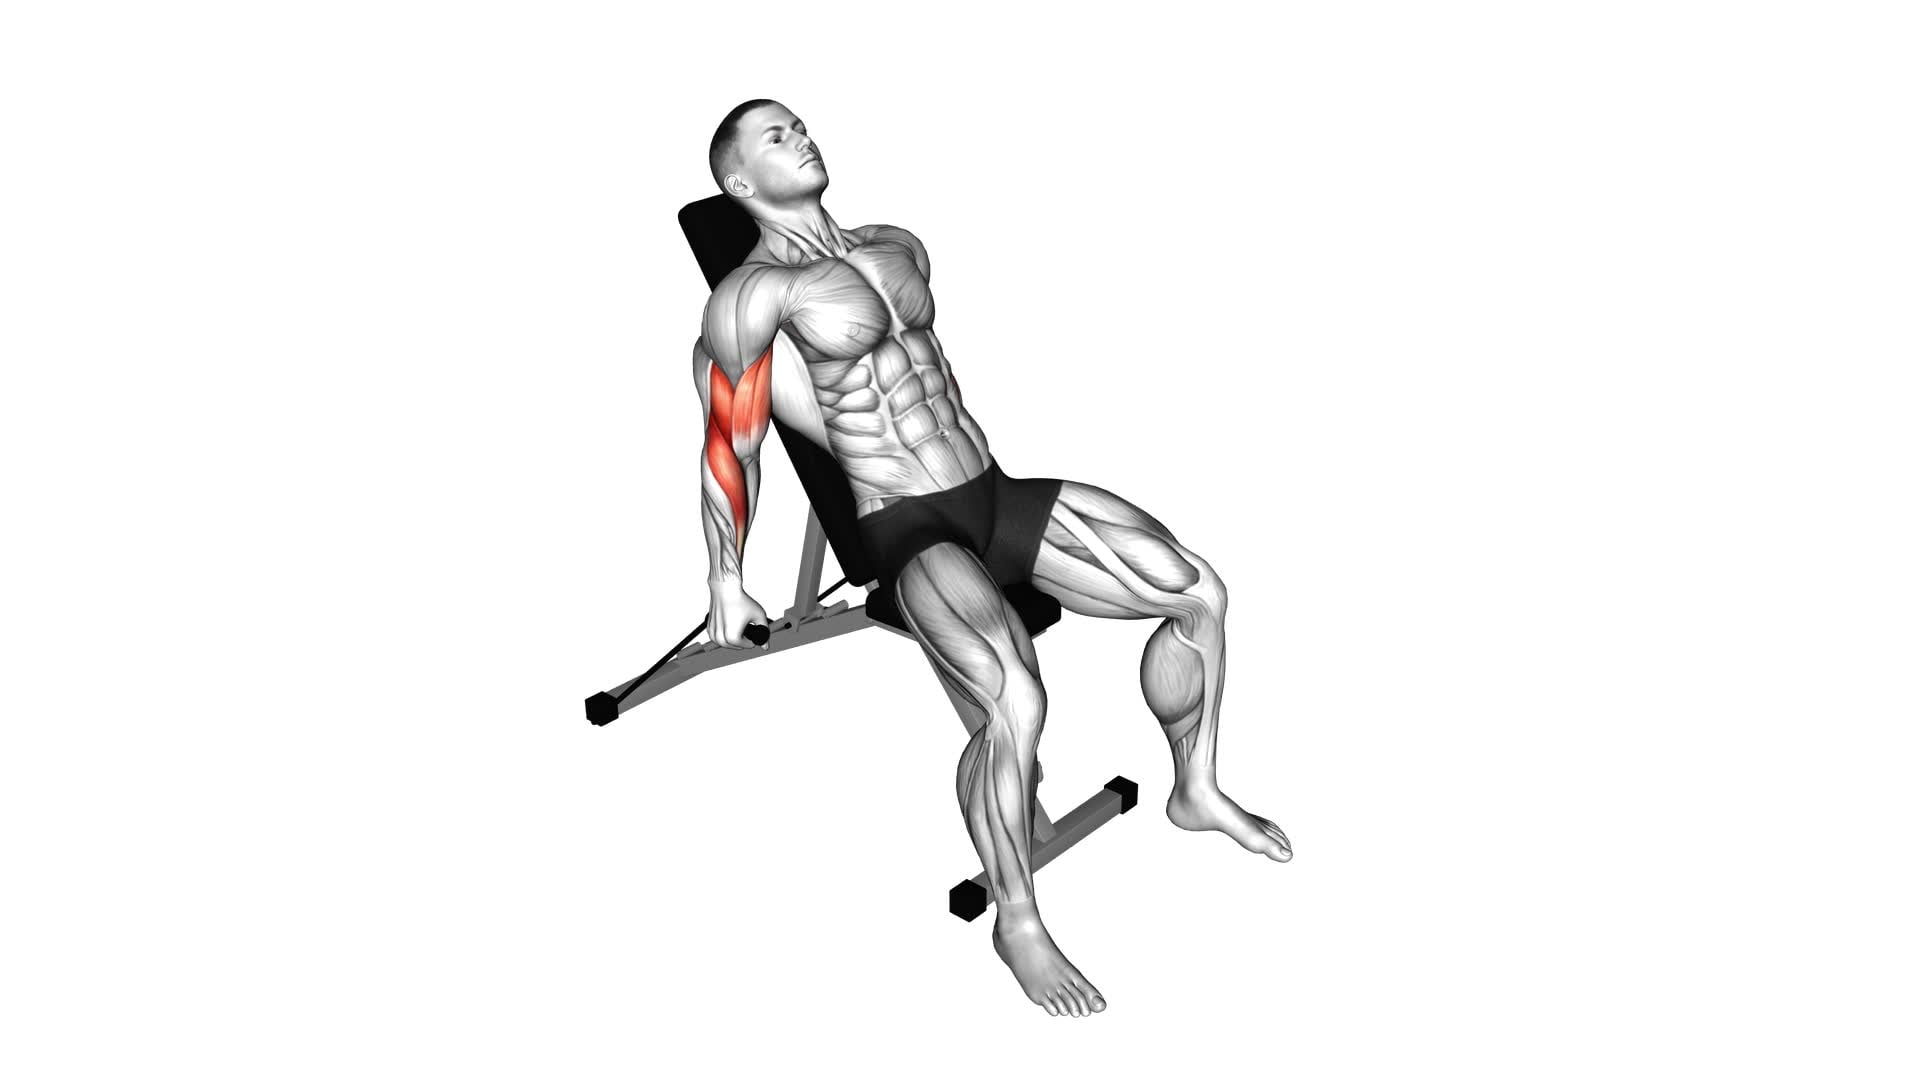 Band Incline Alternate Hammer Curl - Video Exercise Guide & Tips